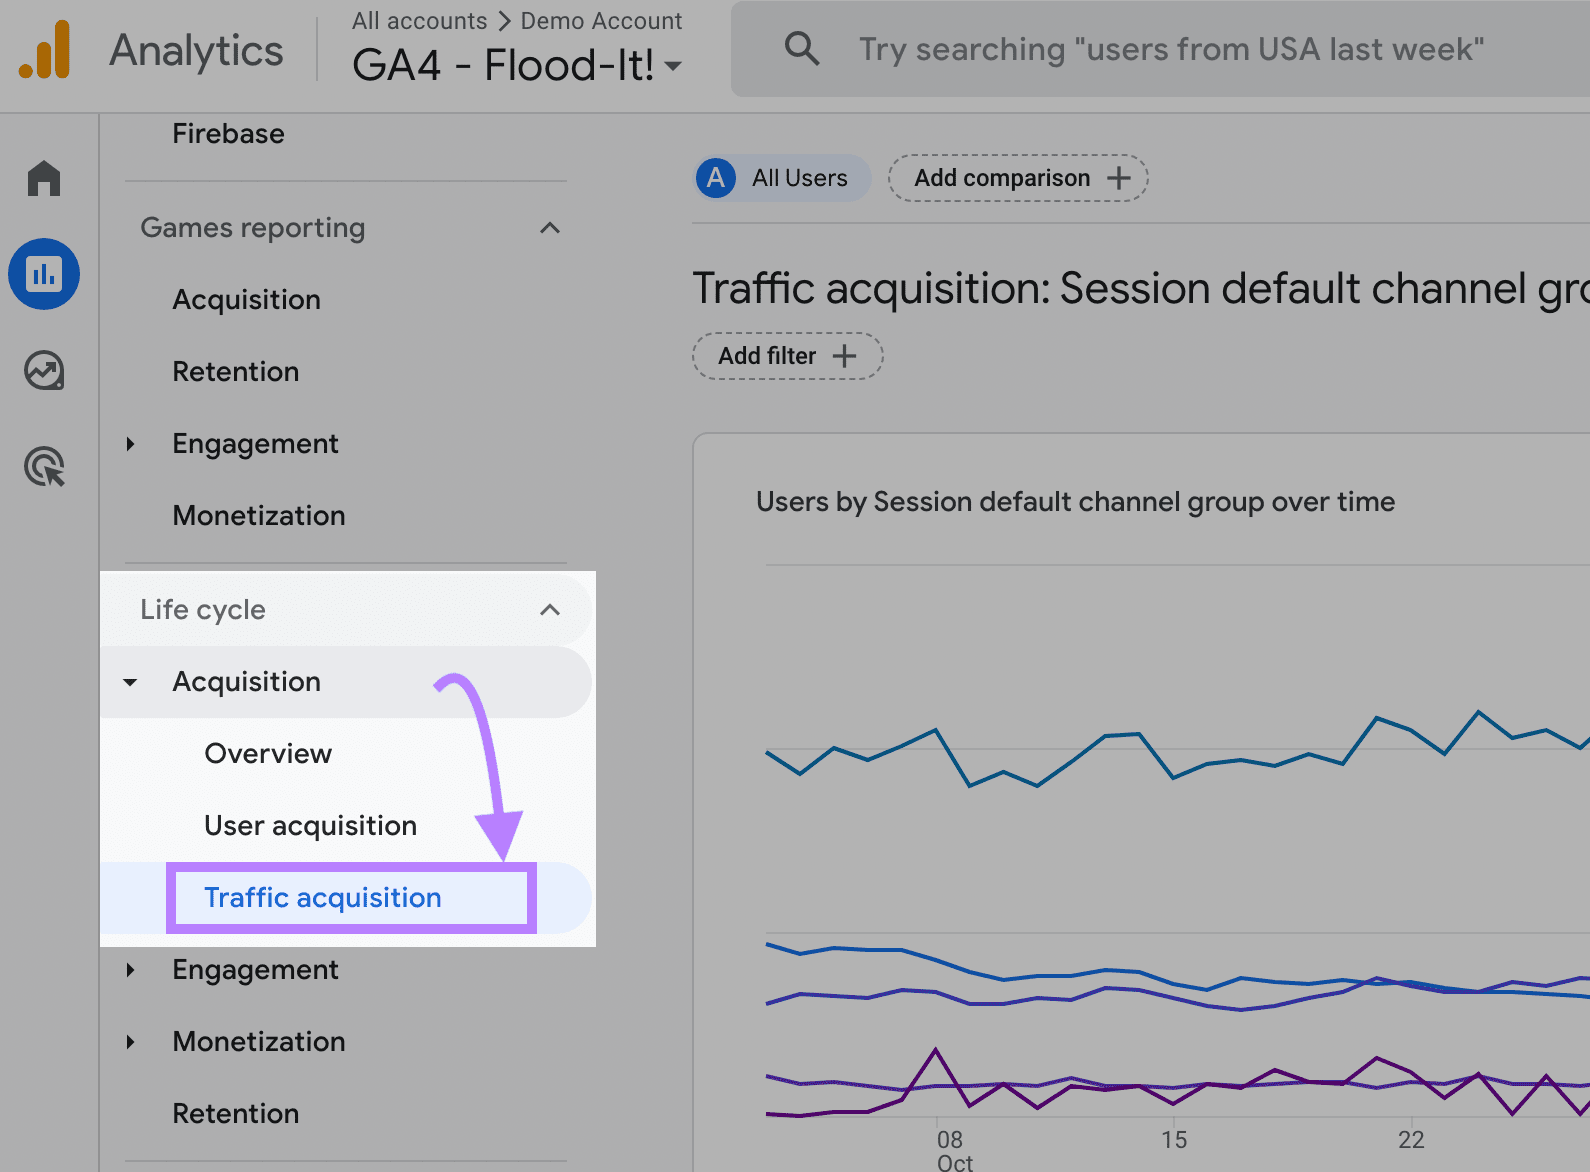 Navigating to “Traffic acquisition" in the GA4 left side menu